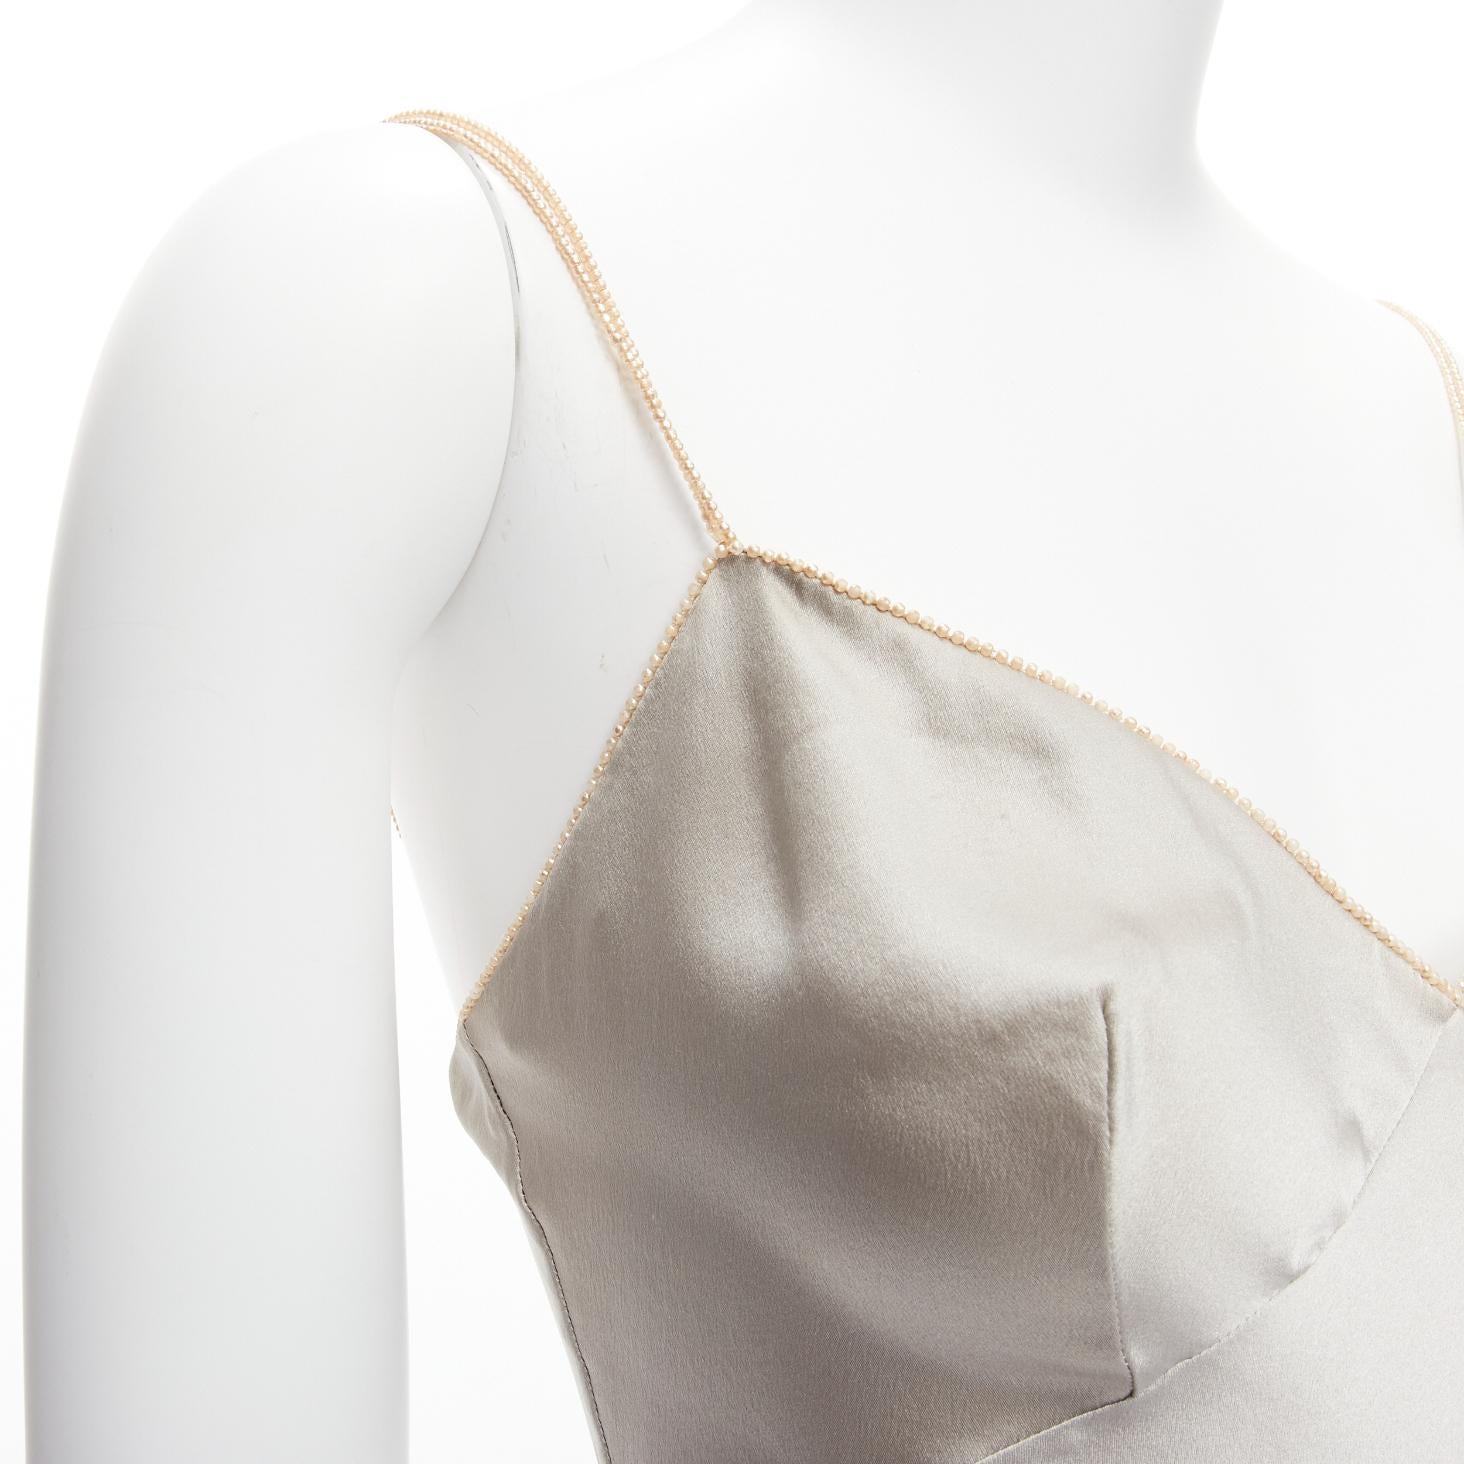 new CHRISTIAN DIOR John Galliano 1998 Vintage 100% genuine Pearls silver slip tank camisole FR36 S
Reference: TGAS/D00515
Brand: Christian Dior
Designer: John Galliano
Collection: SS 1998
Pattern: Solid
Extra Details: Embellishments are 100% genuine